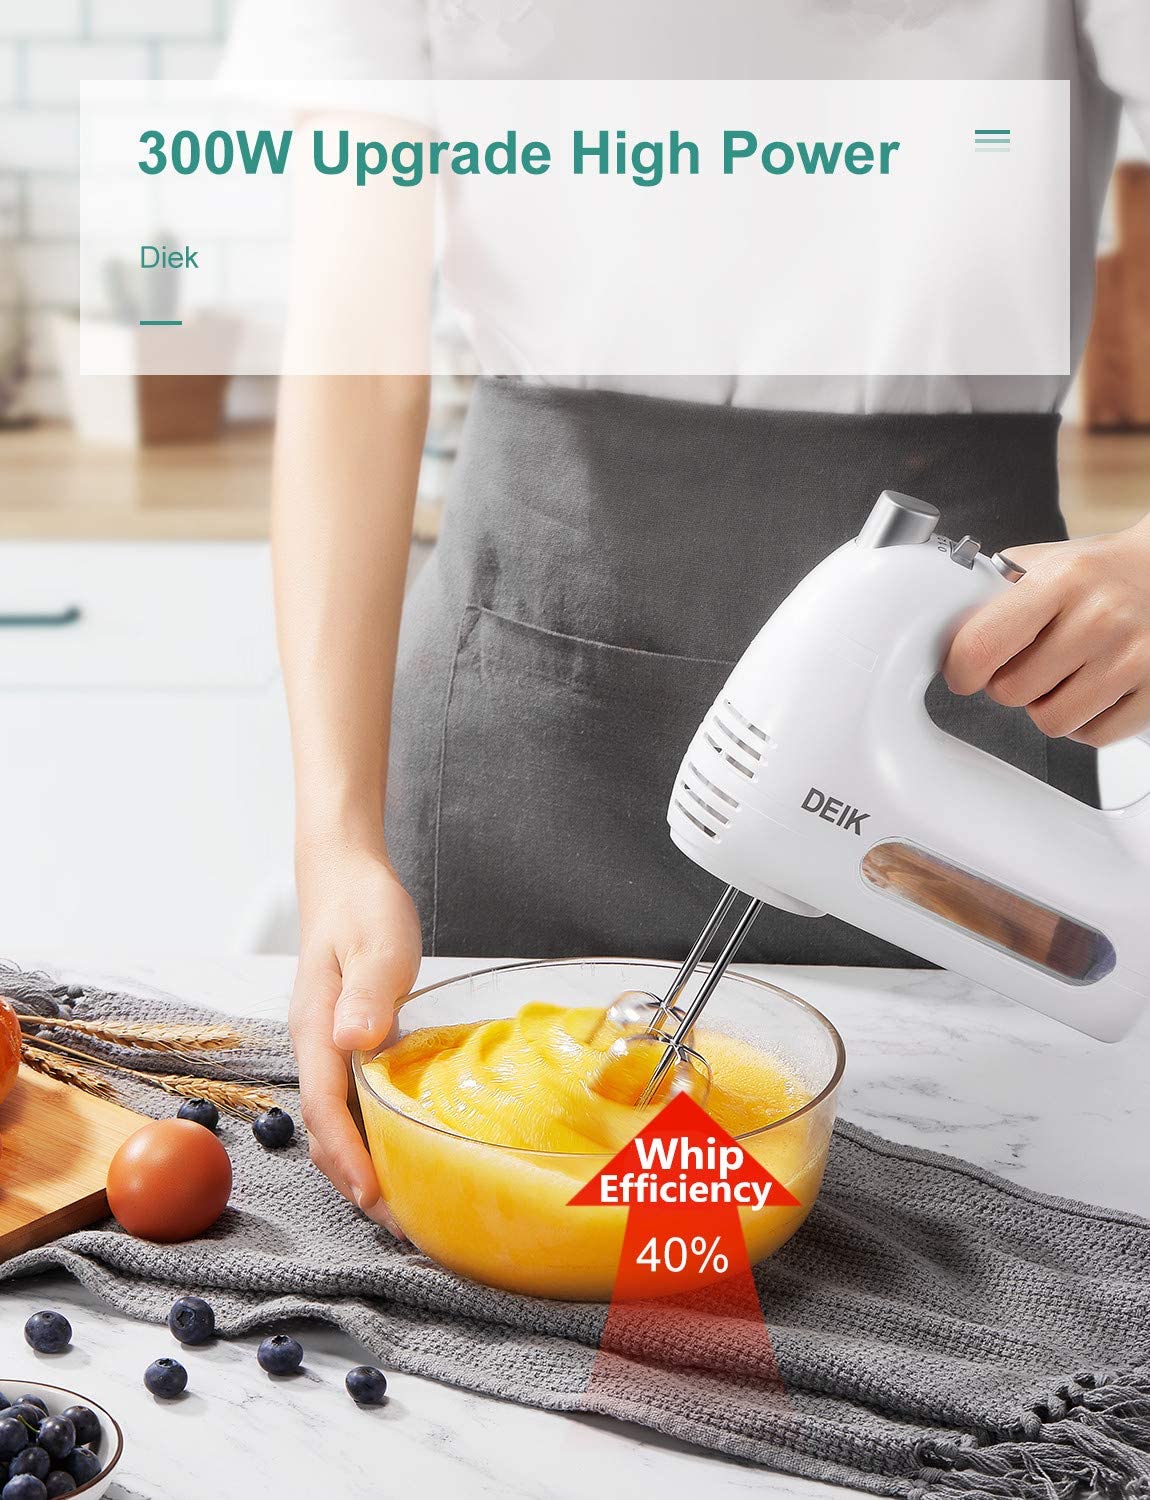 Kitchen 5-Speed Hand Mixer Electric 300W Power Mixer Electric Handheld,  Hand Blender Electric With Beaters Dough Hooks, One Button Eject Design